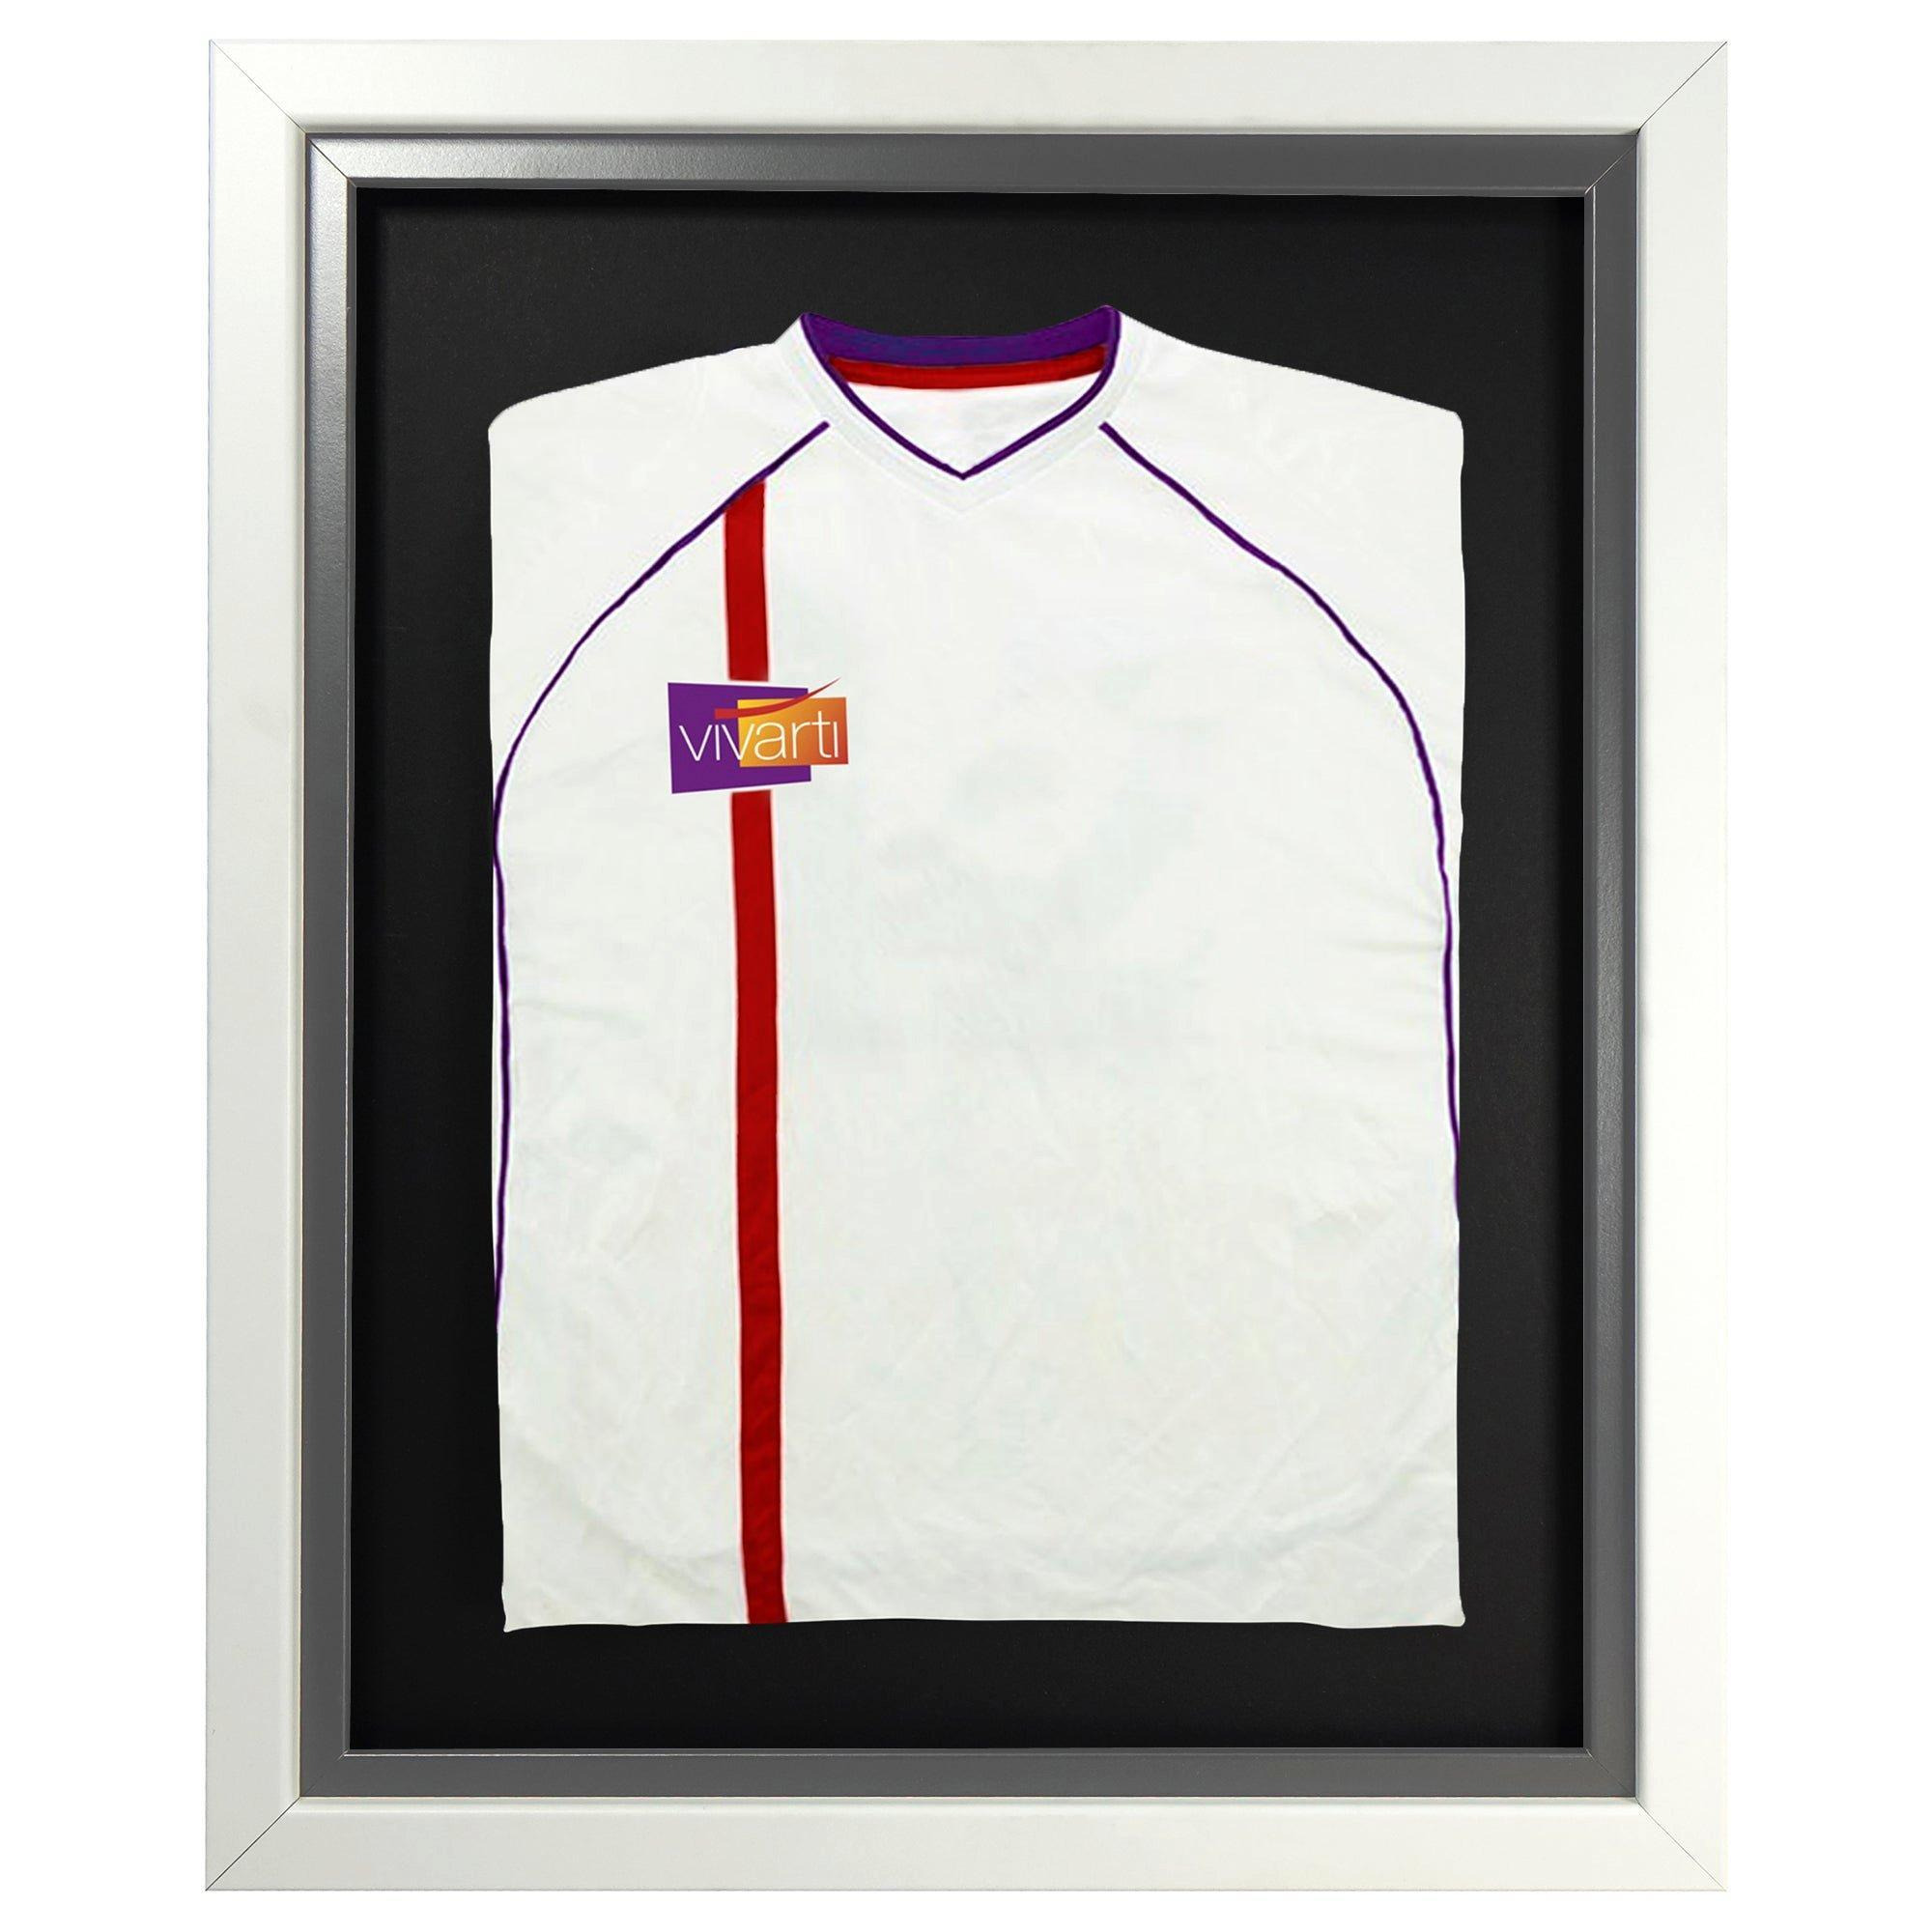 Infant Standard Mounted Sports Shirt Display Frame with White Frame and Silver Inner Frame 40 x 50cm - image 1